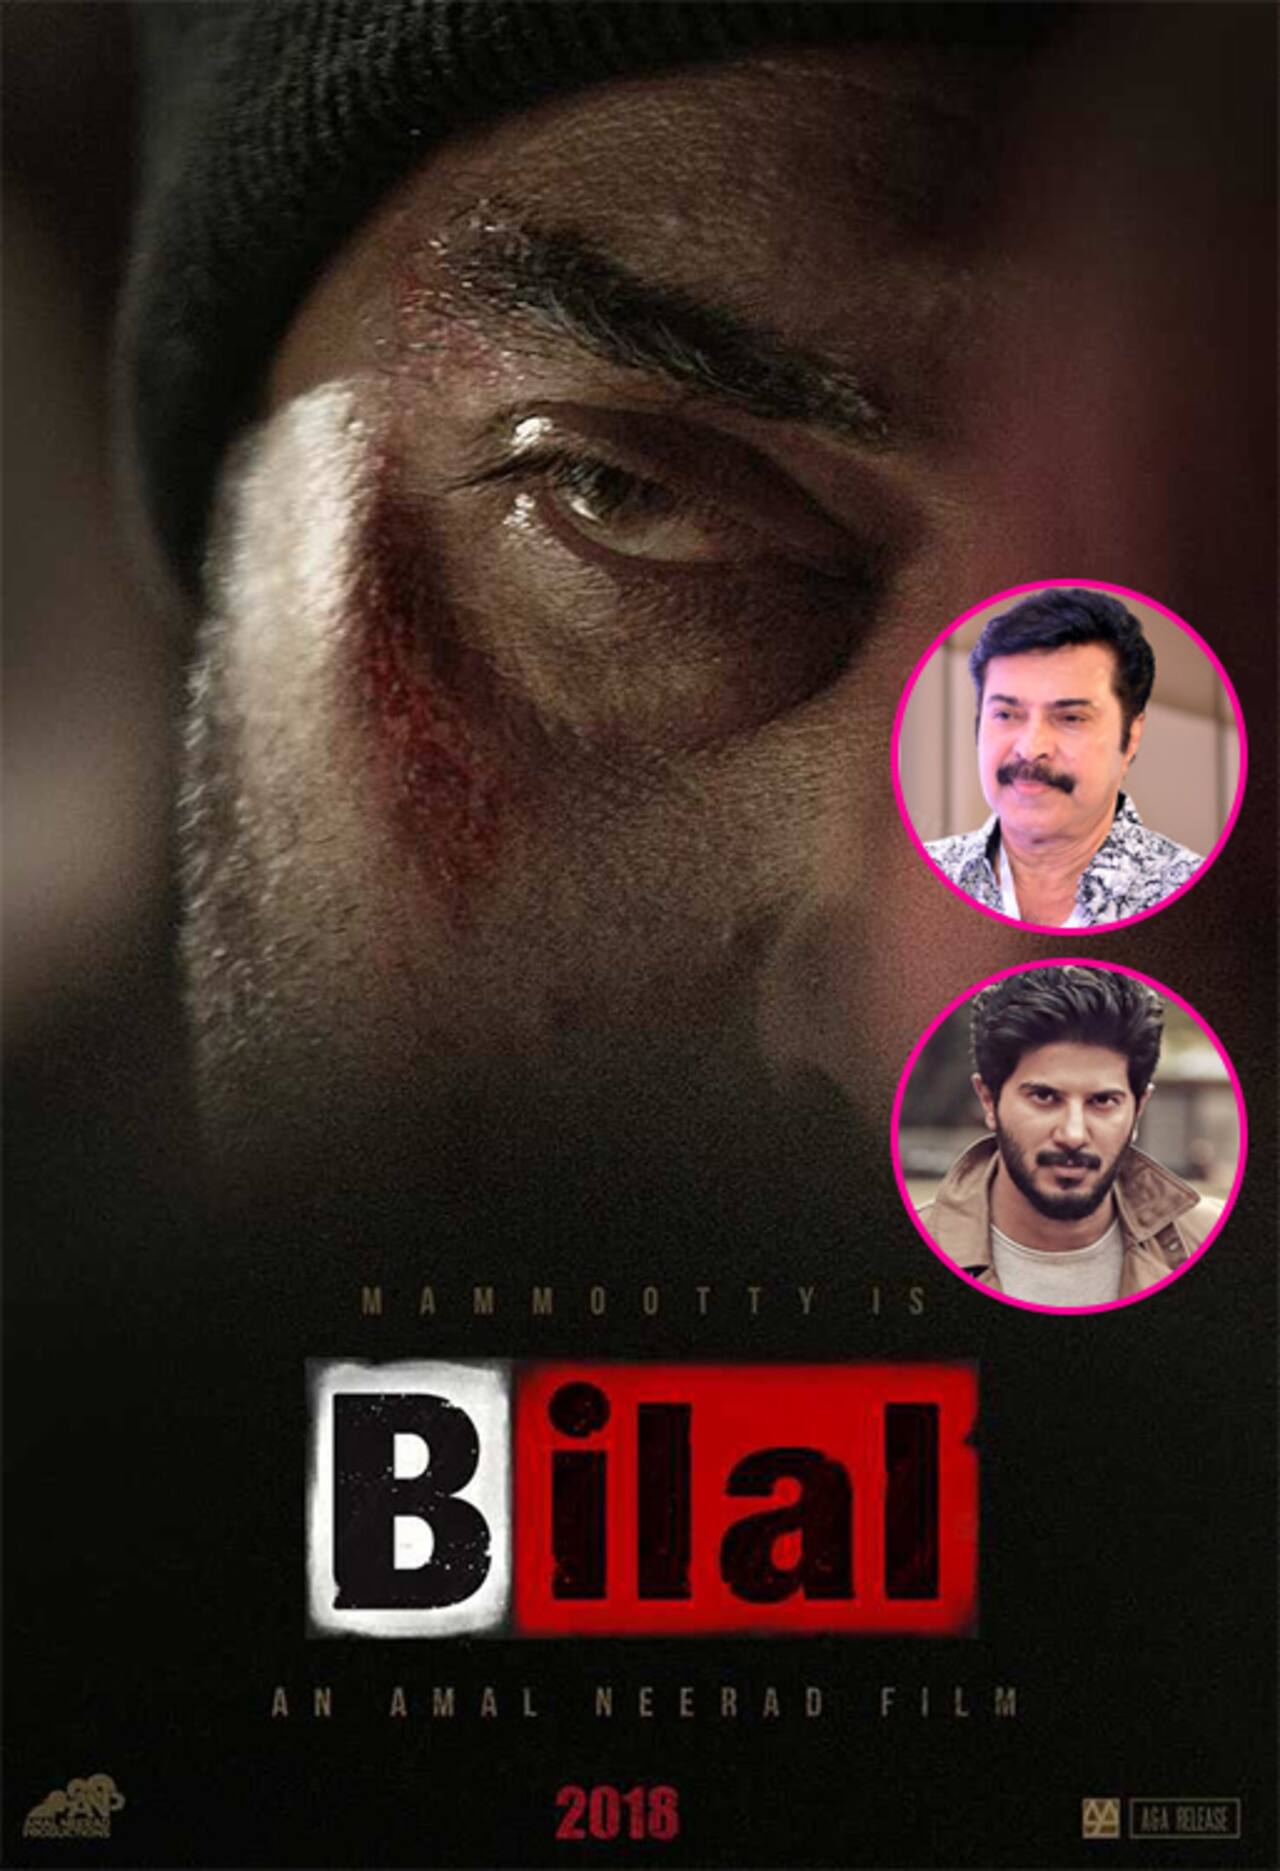 Bilal first look: Mammootty's intensity wows son Dulquer Salmaan - view tweet!